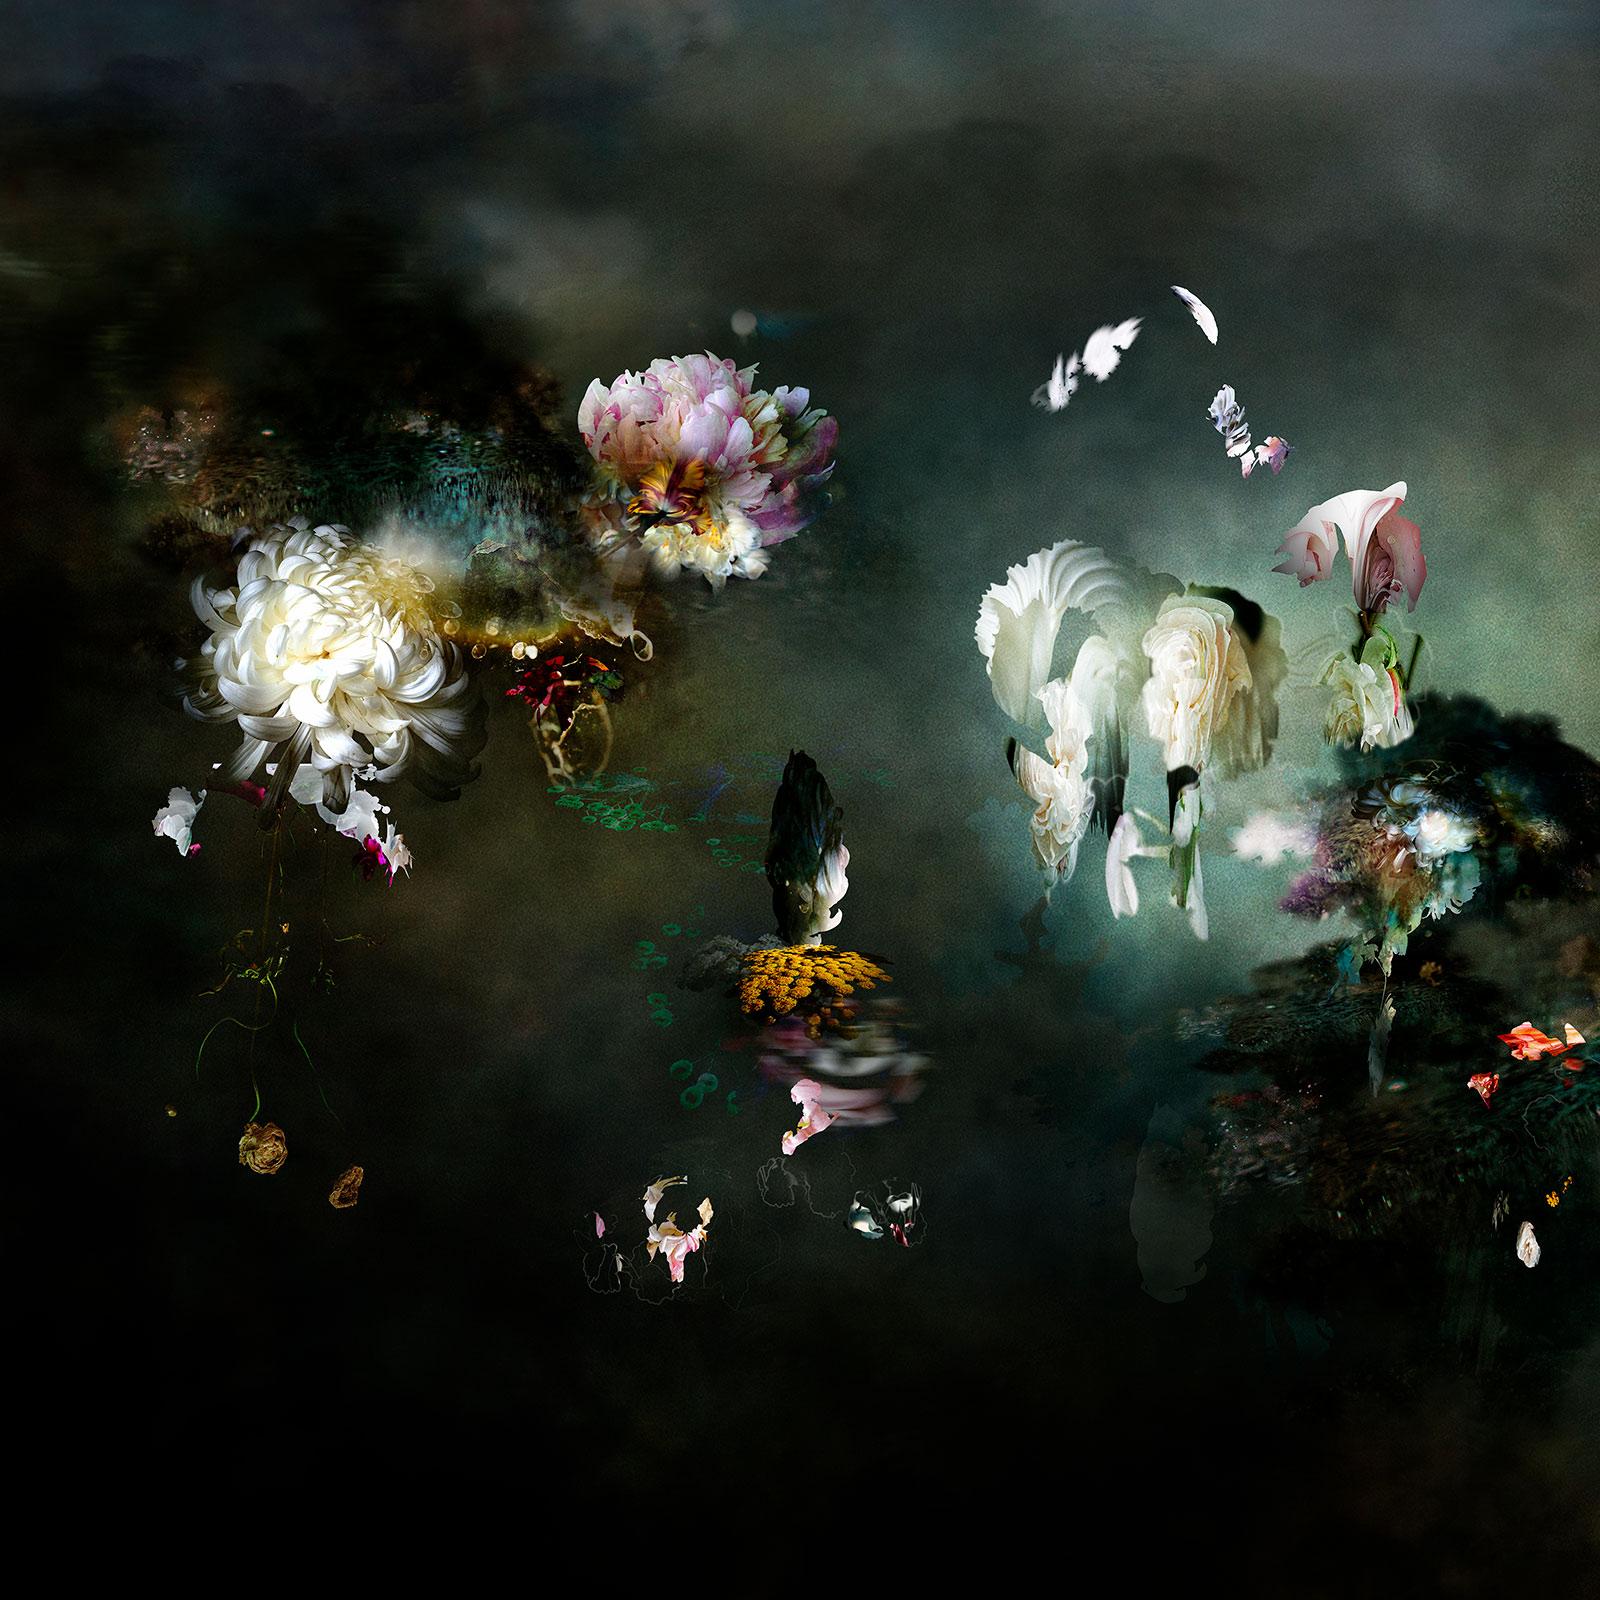 Isabelle Menin Still-Life Photograph - ALJ #2 - abstract floral still life contemporary landscape color photography